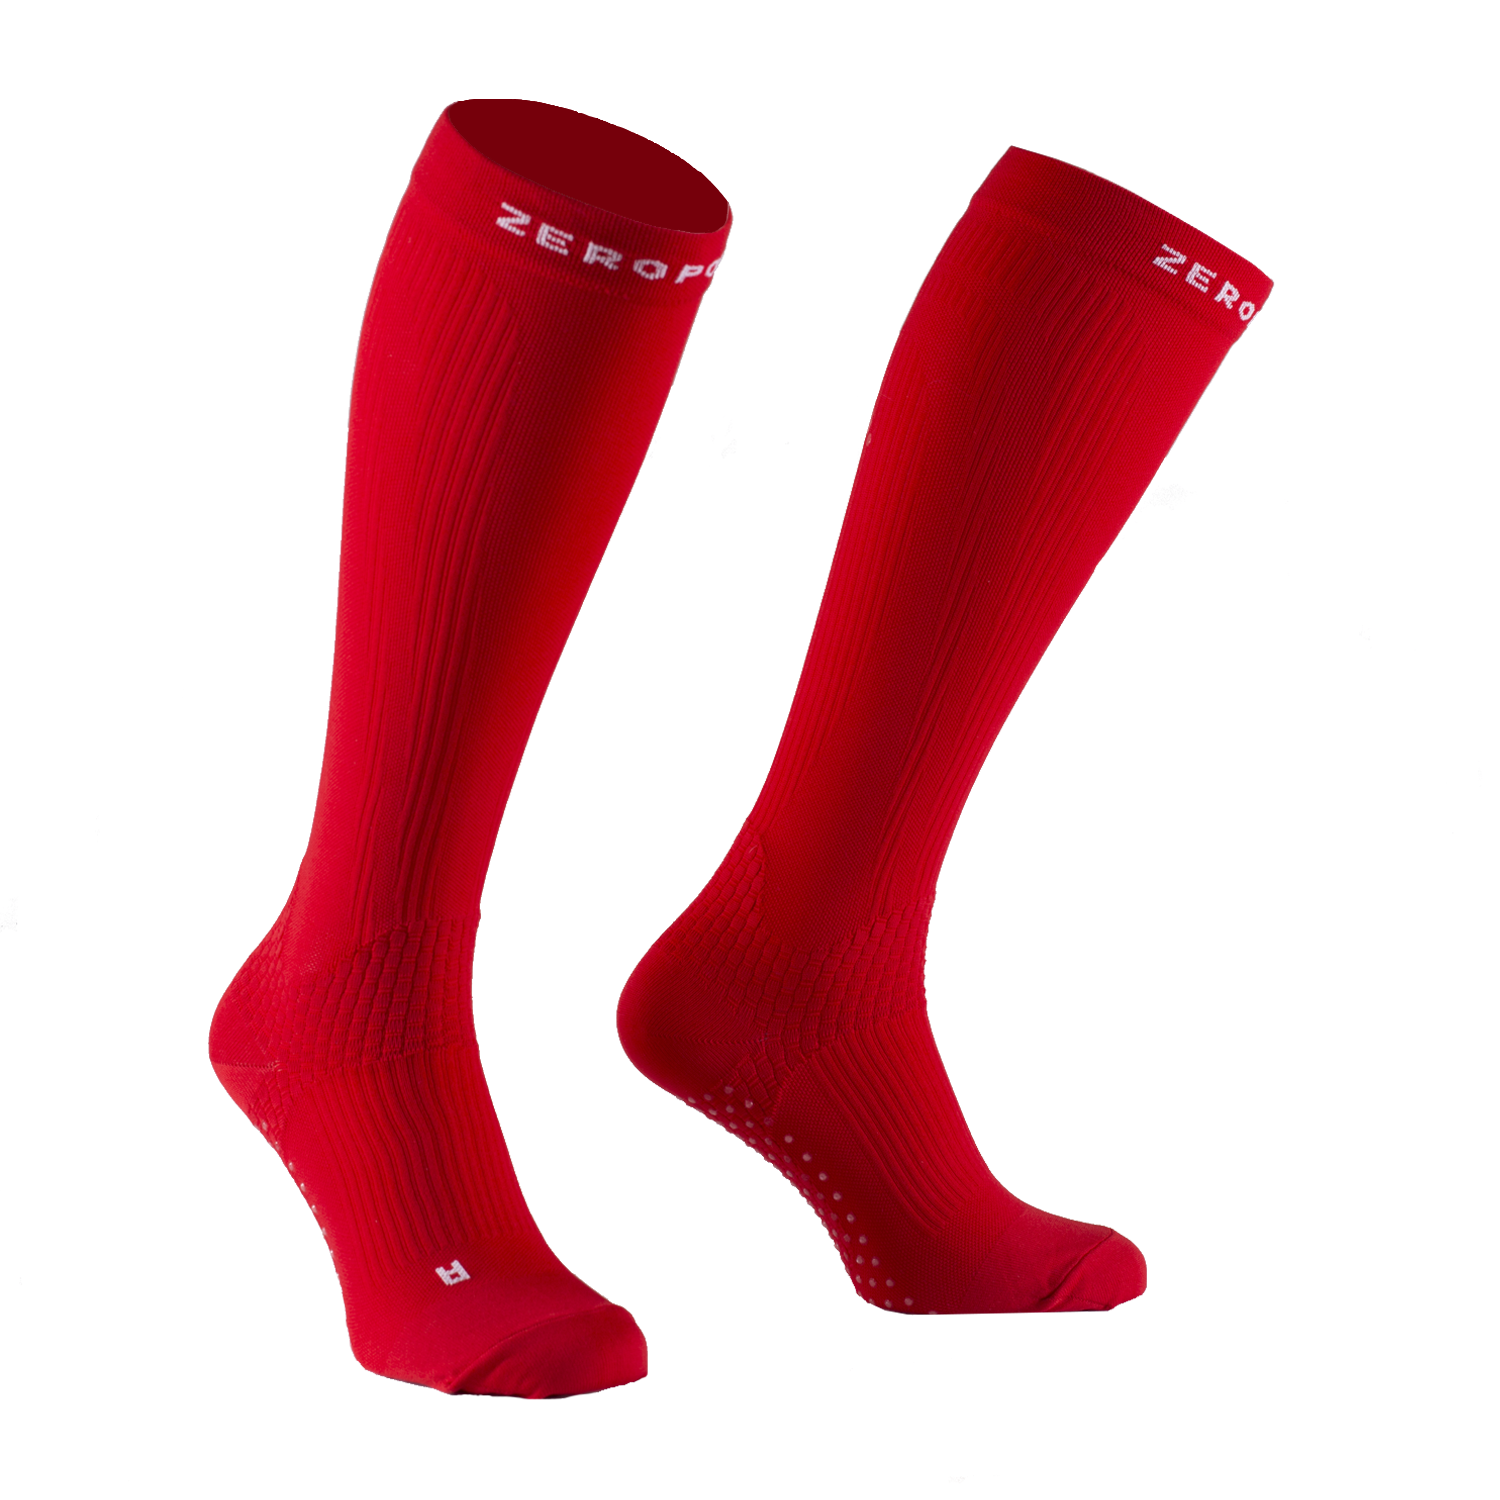 Team High Compression Sock, Red - Zeropoint High Compression